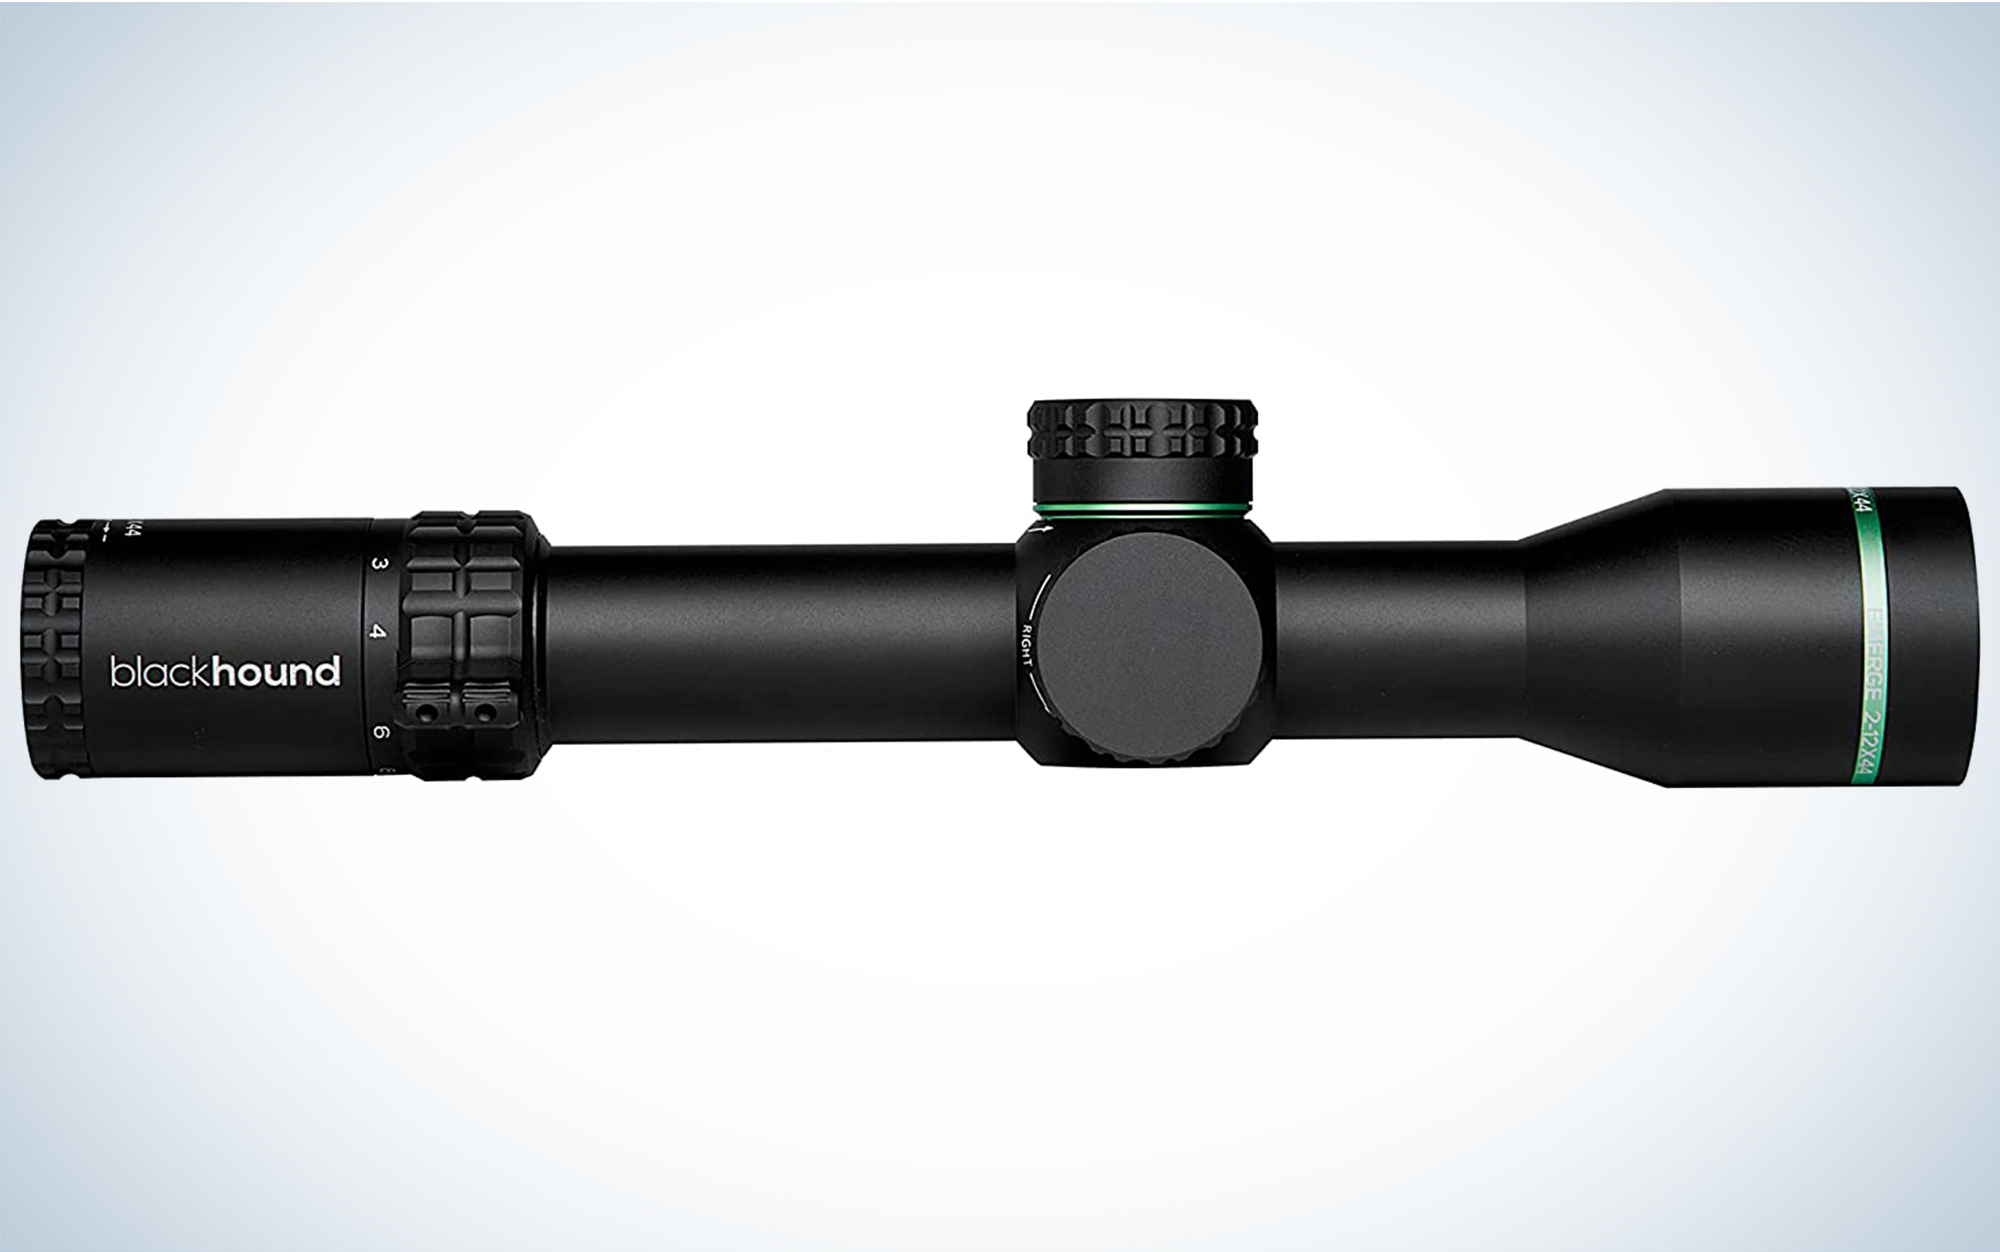 The Blackhound Emerge 2-12x44 MIL is the best precision rifle scope.